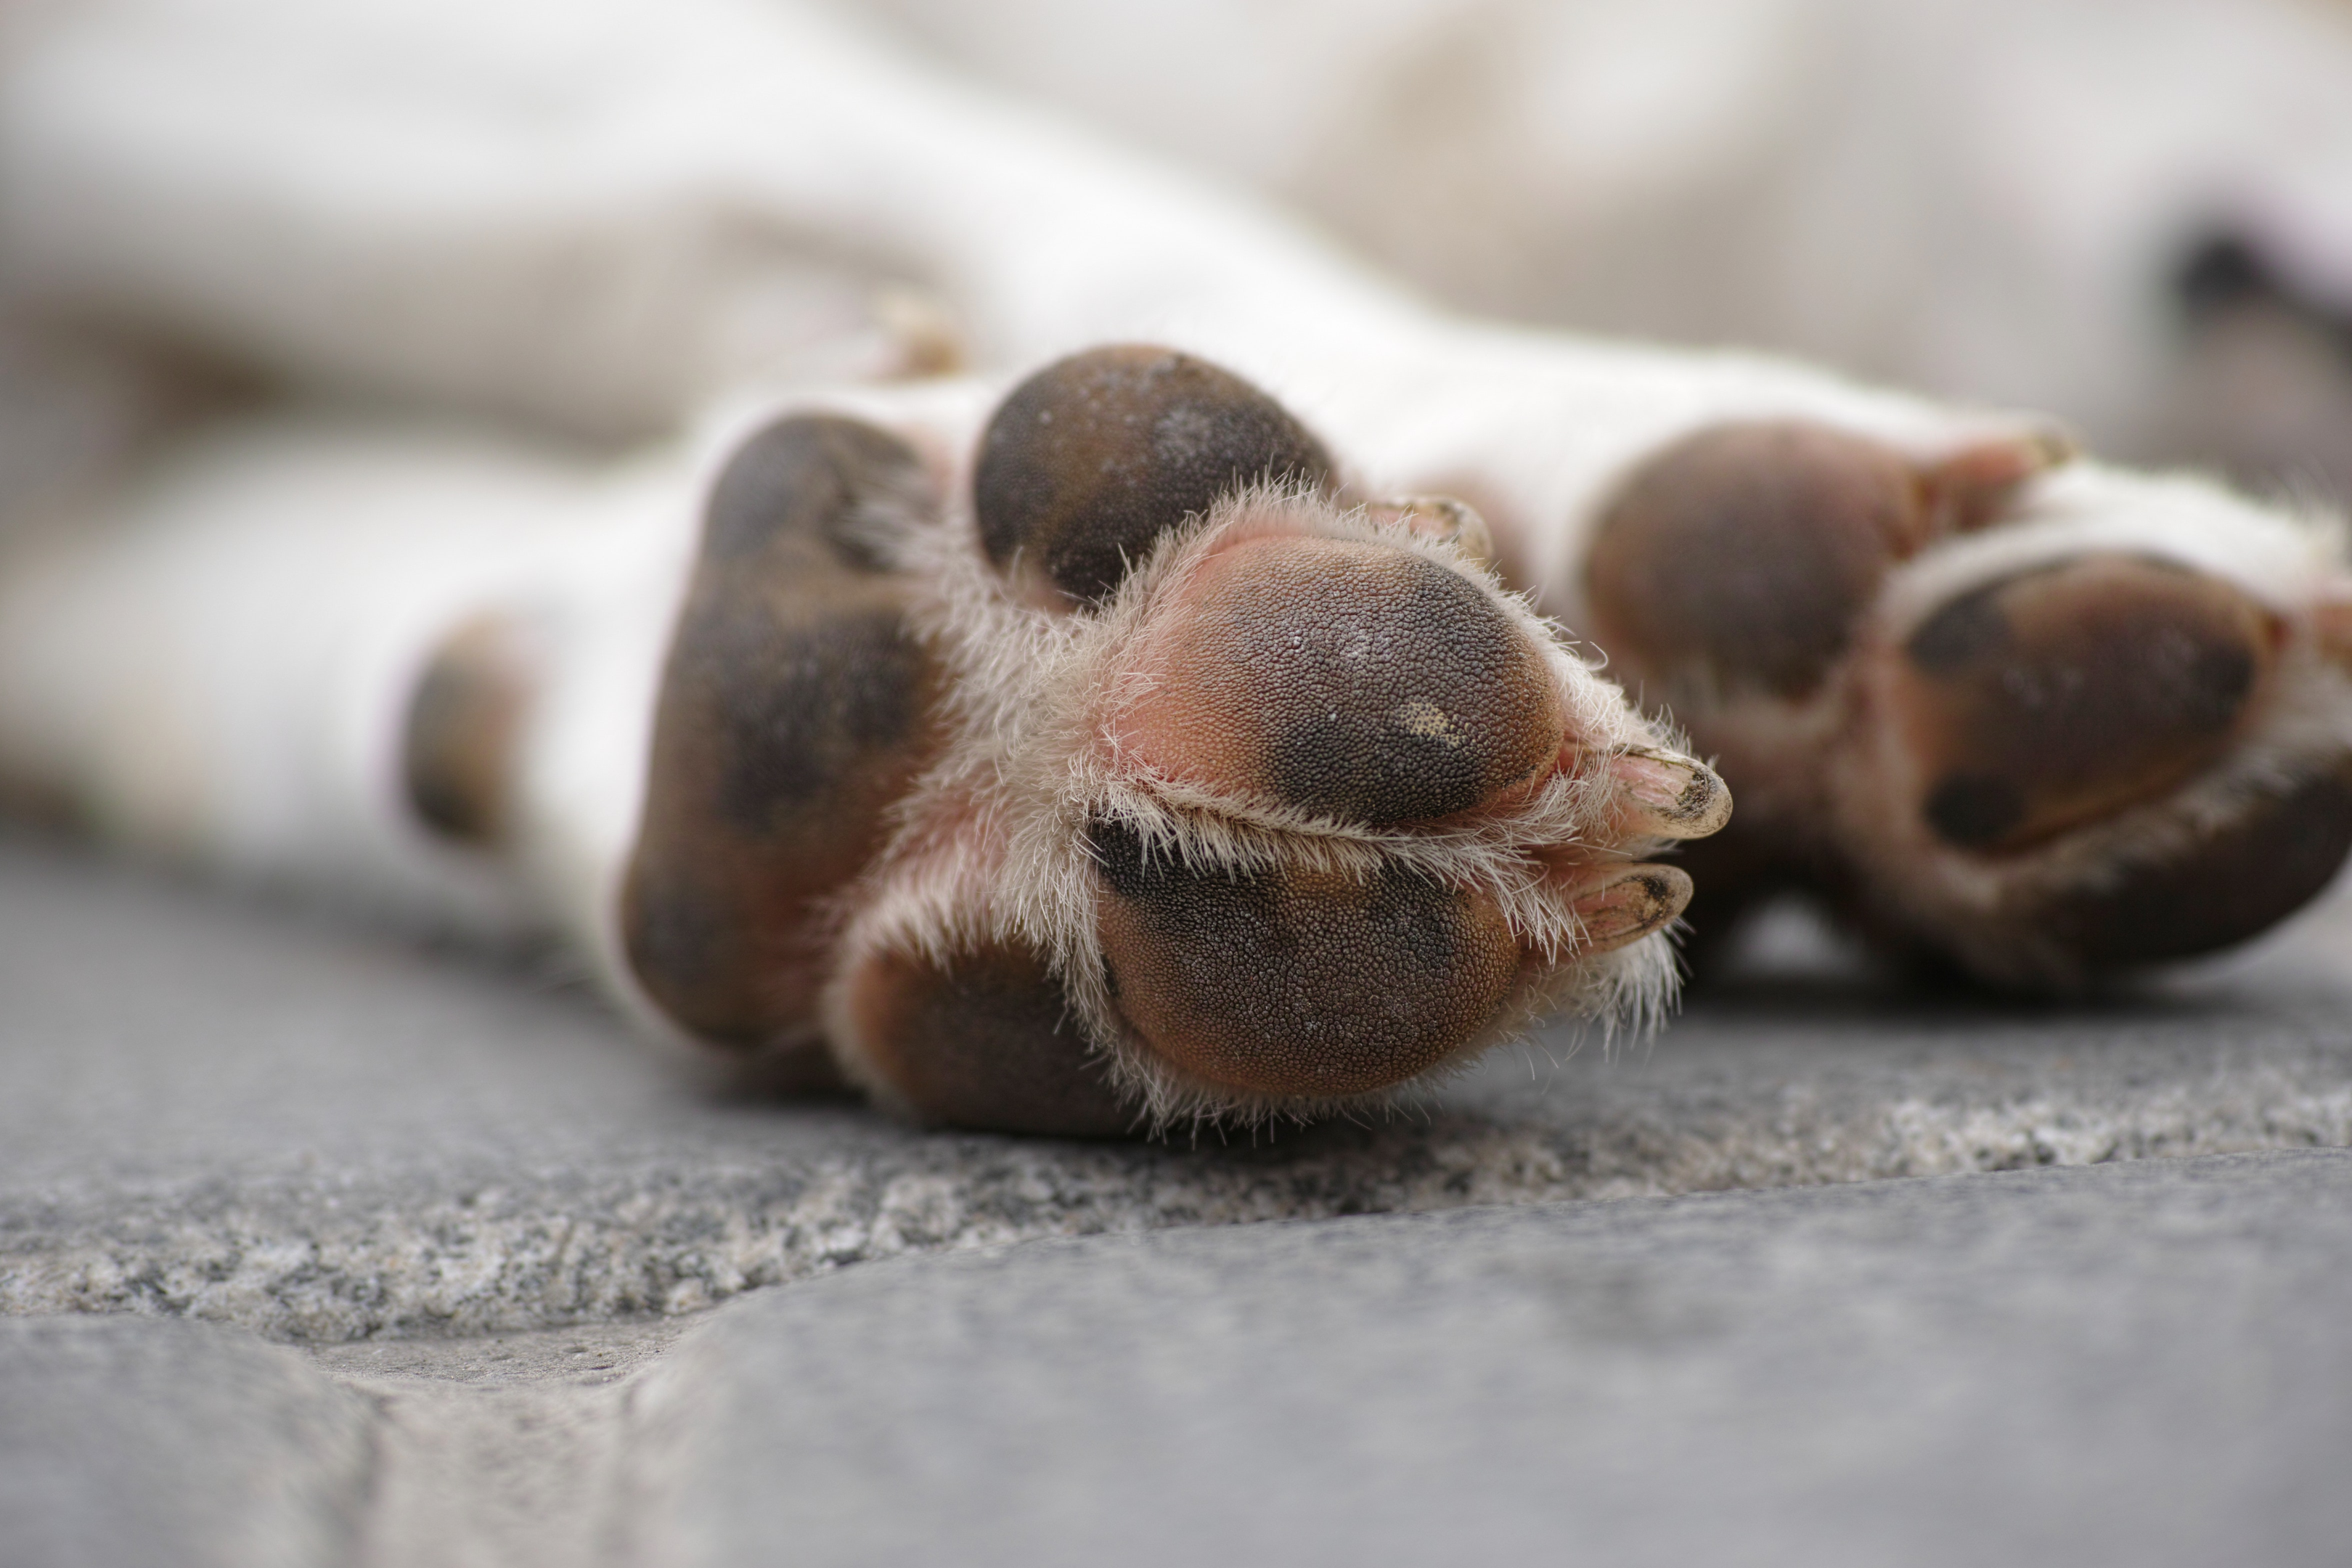 https://www.pexels.com/photo/shallow-focus-photography-of-white-dog-s-paws-1438798/